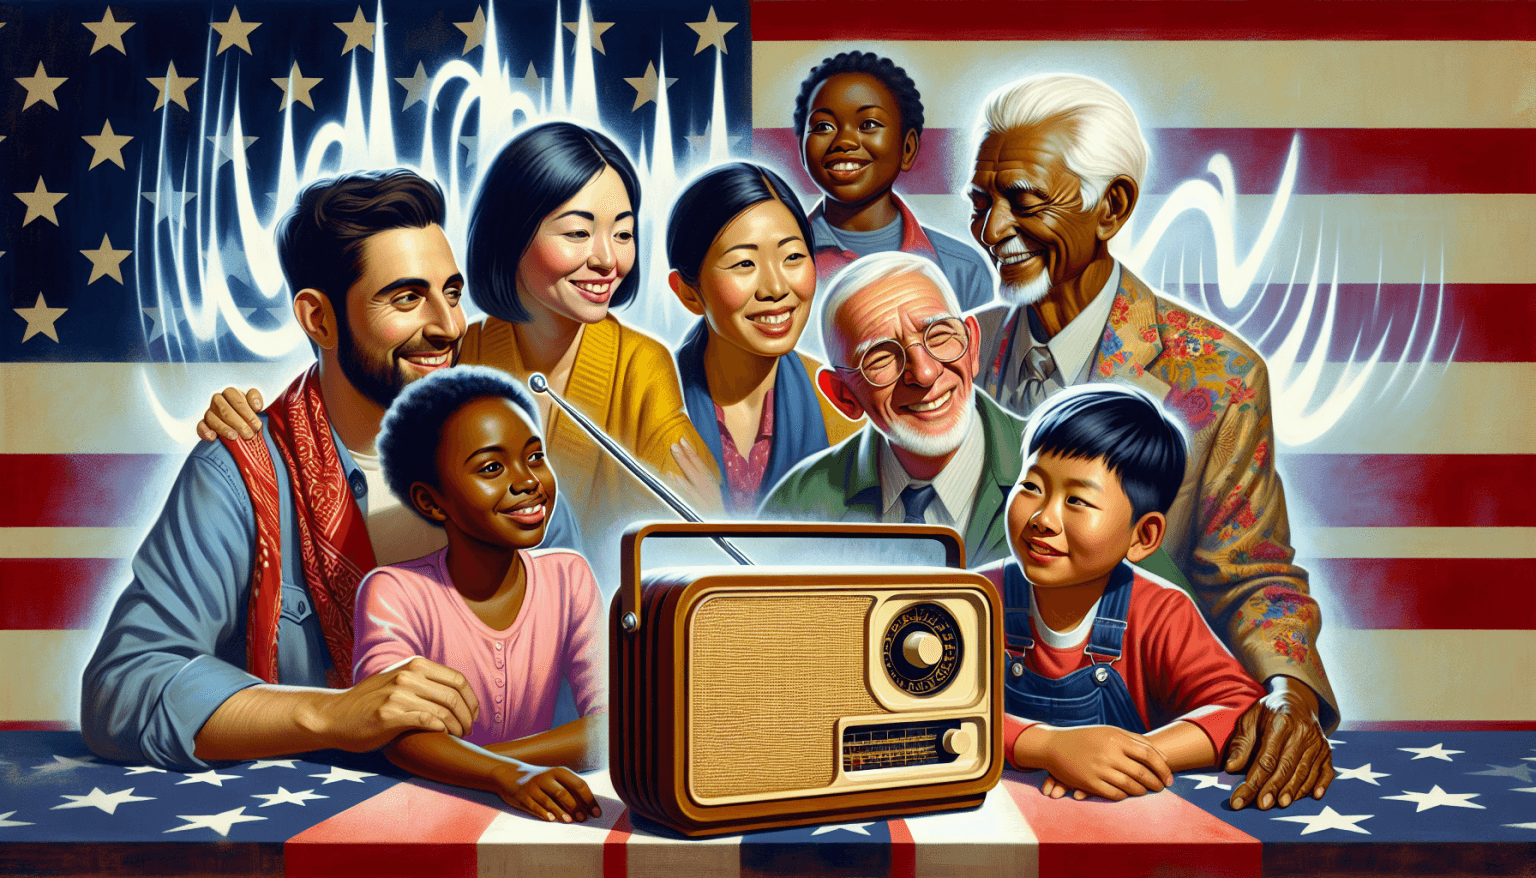 Create an image of a diverse group of people in the United States, gathered around a radio tuned to a Spanish-language Christian station, with expressions of joy and spiritual connection on their face